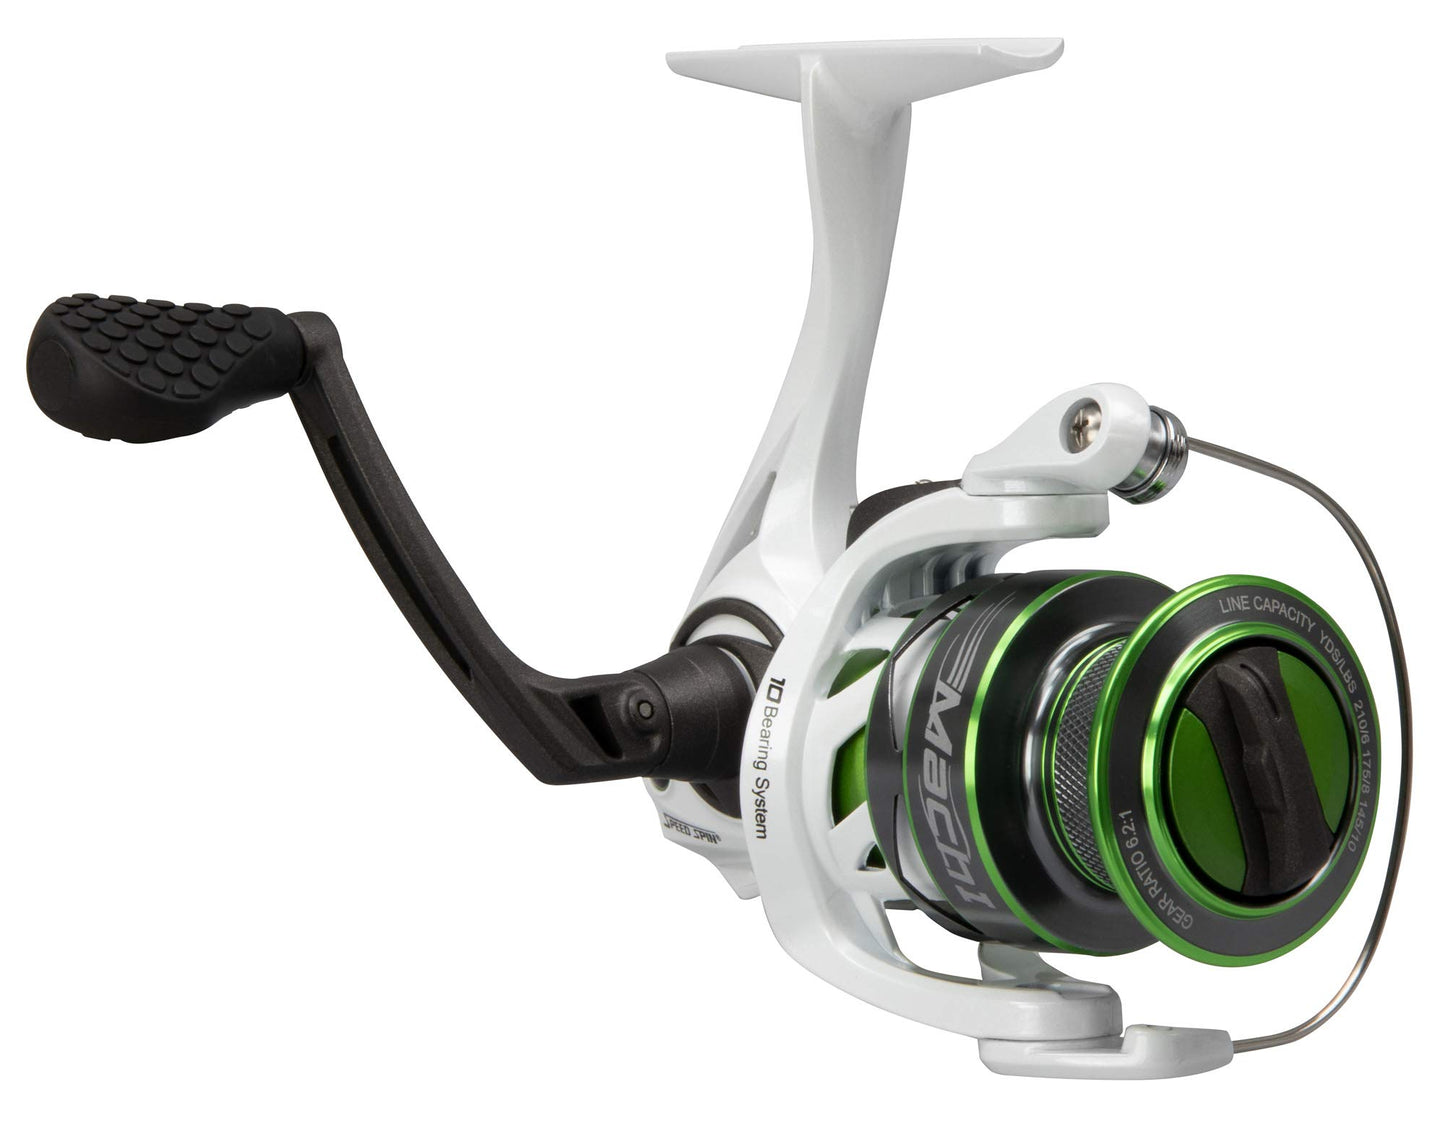 Lew's Mach 1 Speed Spin Spinning Reel